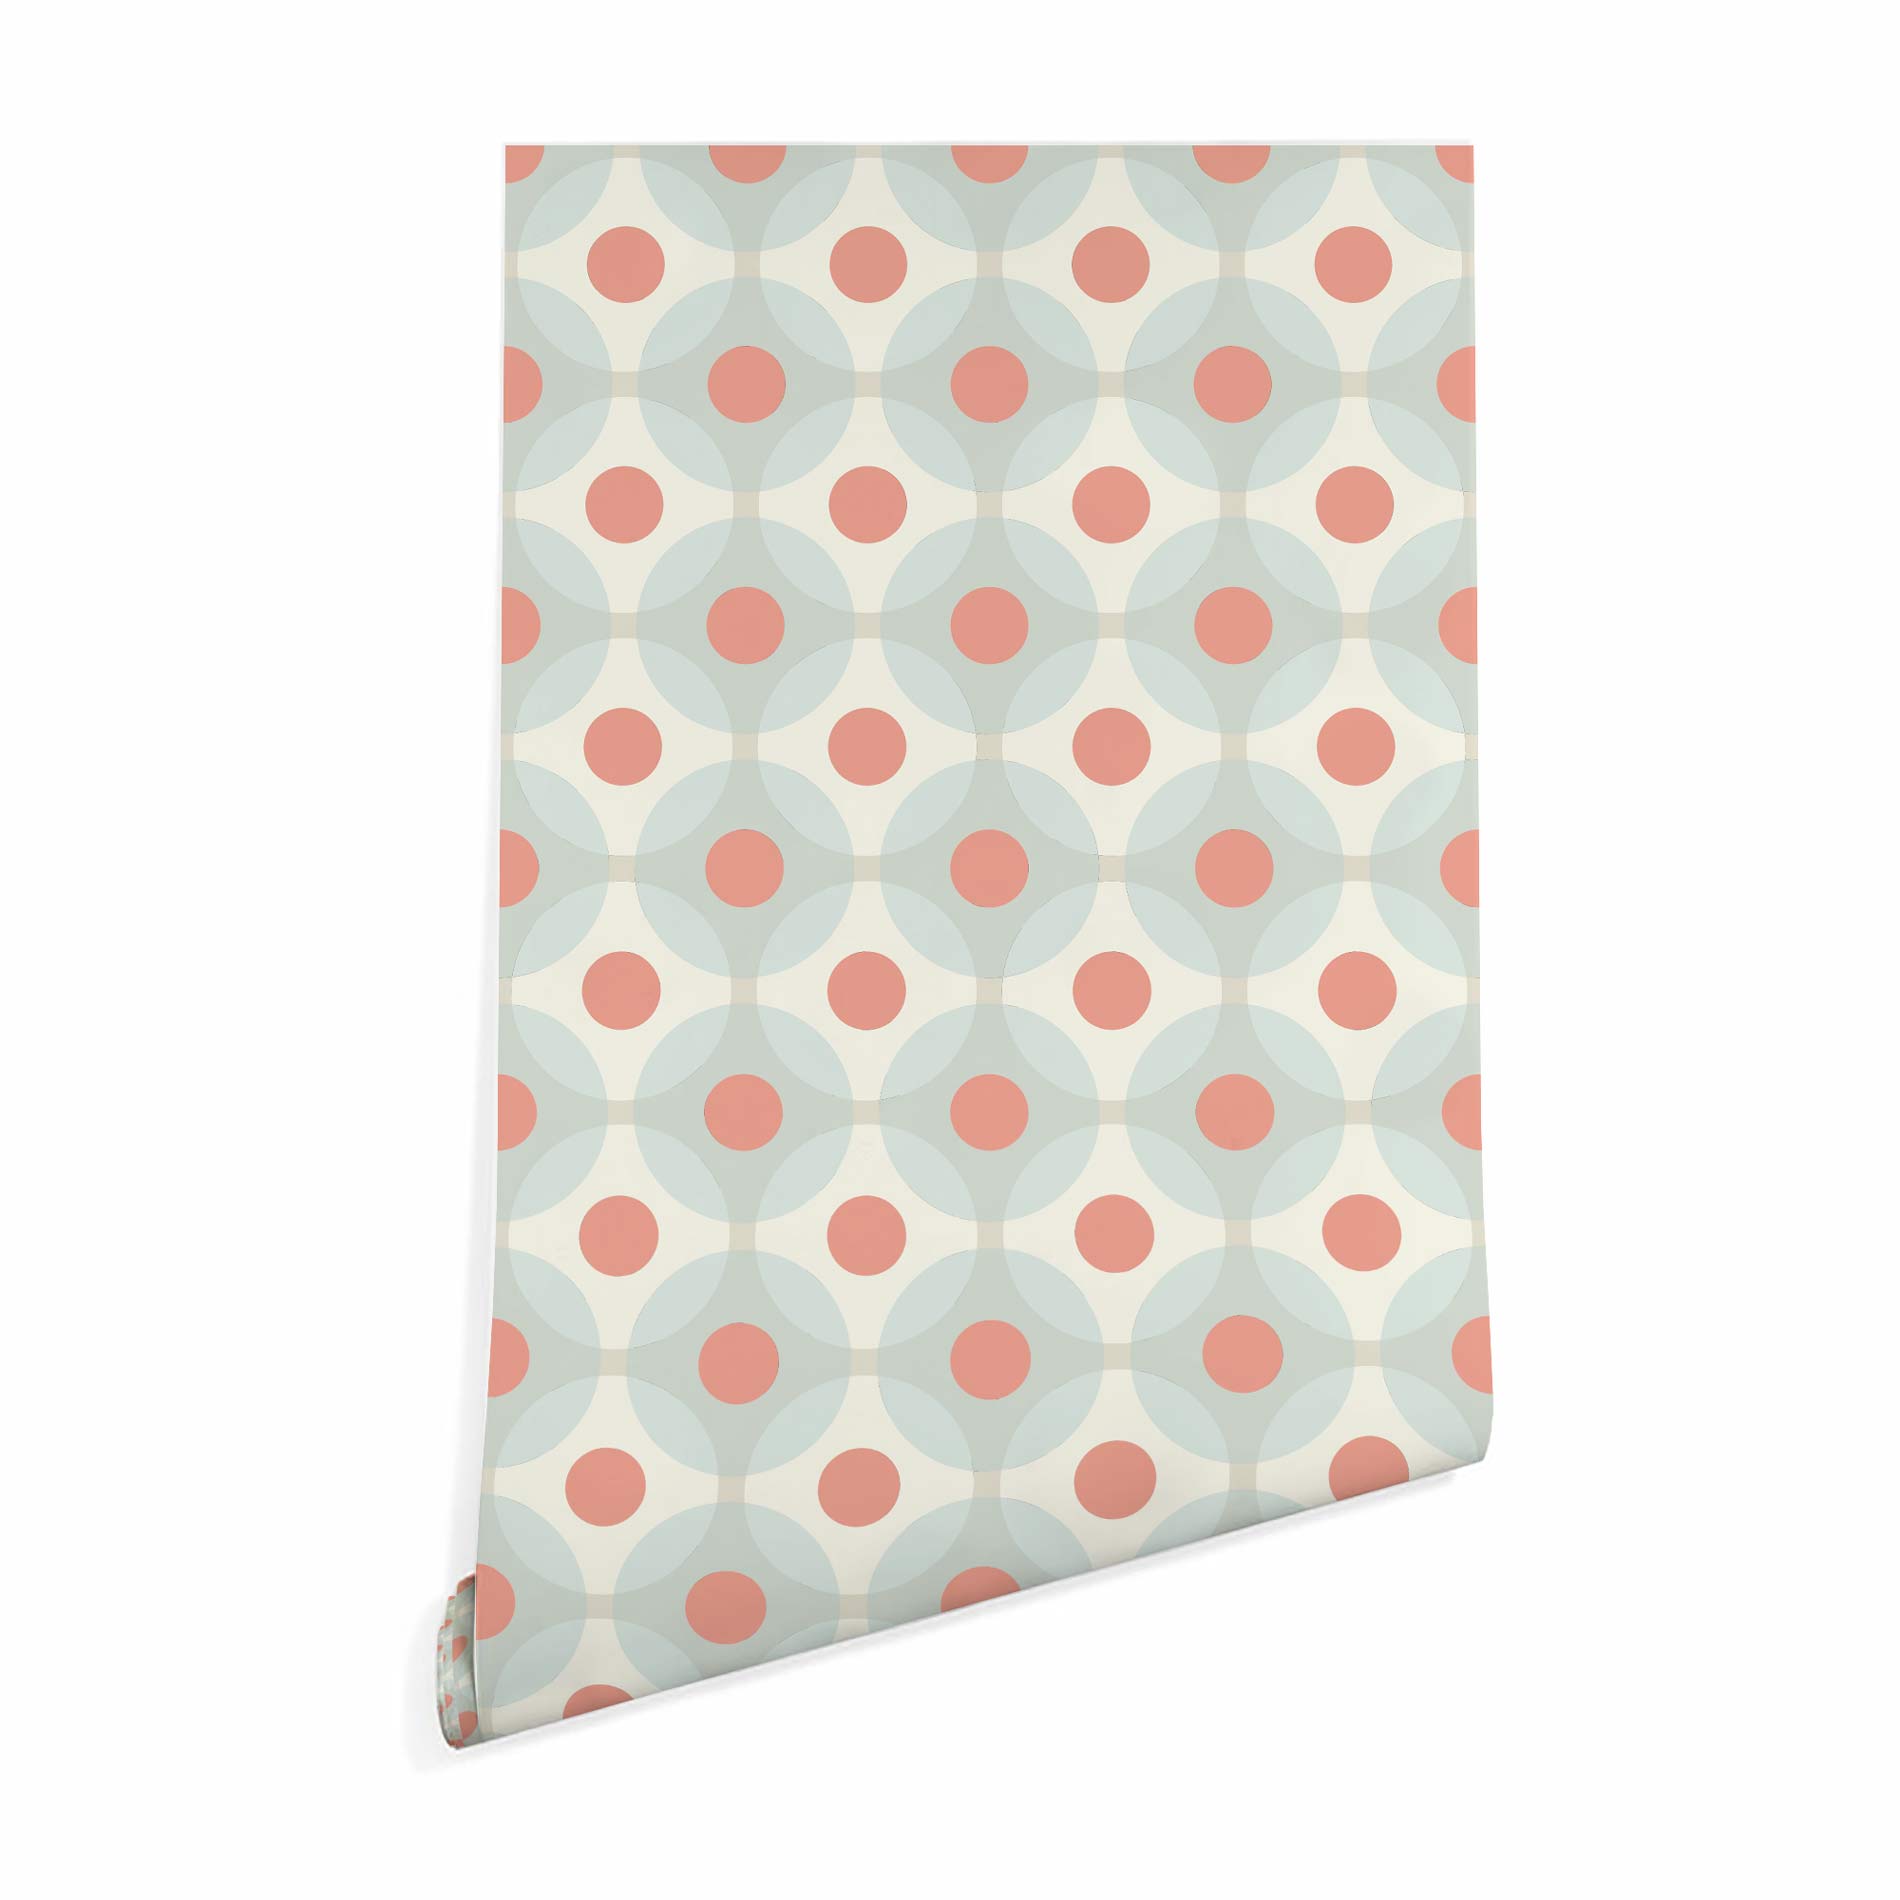 Retro geometric dotted peel and stick removable wallpaper